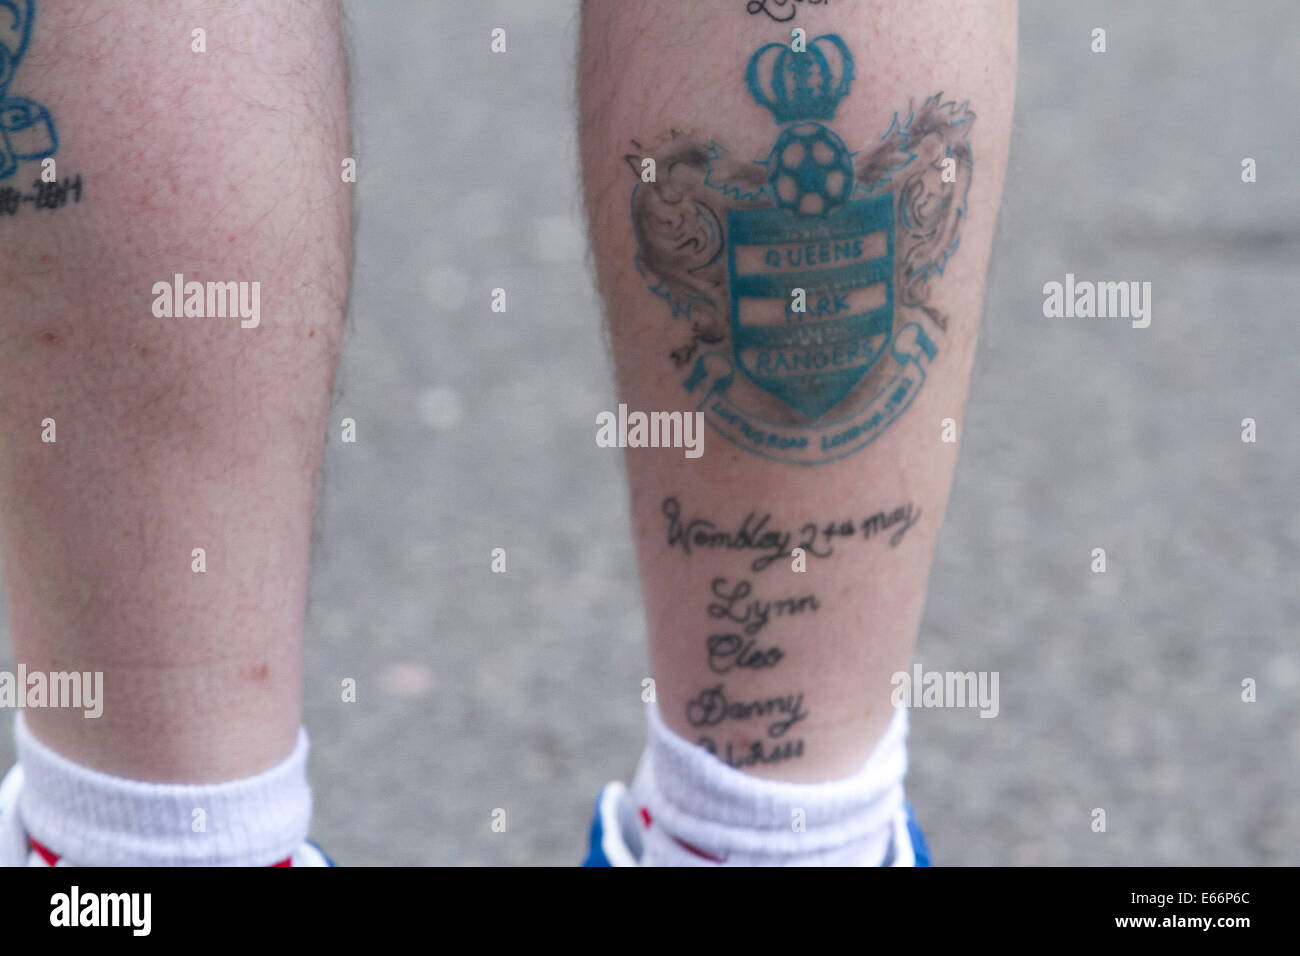 London,UK. 16th August 2014. A supporter with a QPR club crest tattooed on his leg. Football supporters arrive on the opening day of the English football league season fixture between Queens Park Rangers FC and Hull FC at Loftus Road London Credit:  amer ghazzal/Alamy Live News Stock Photo